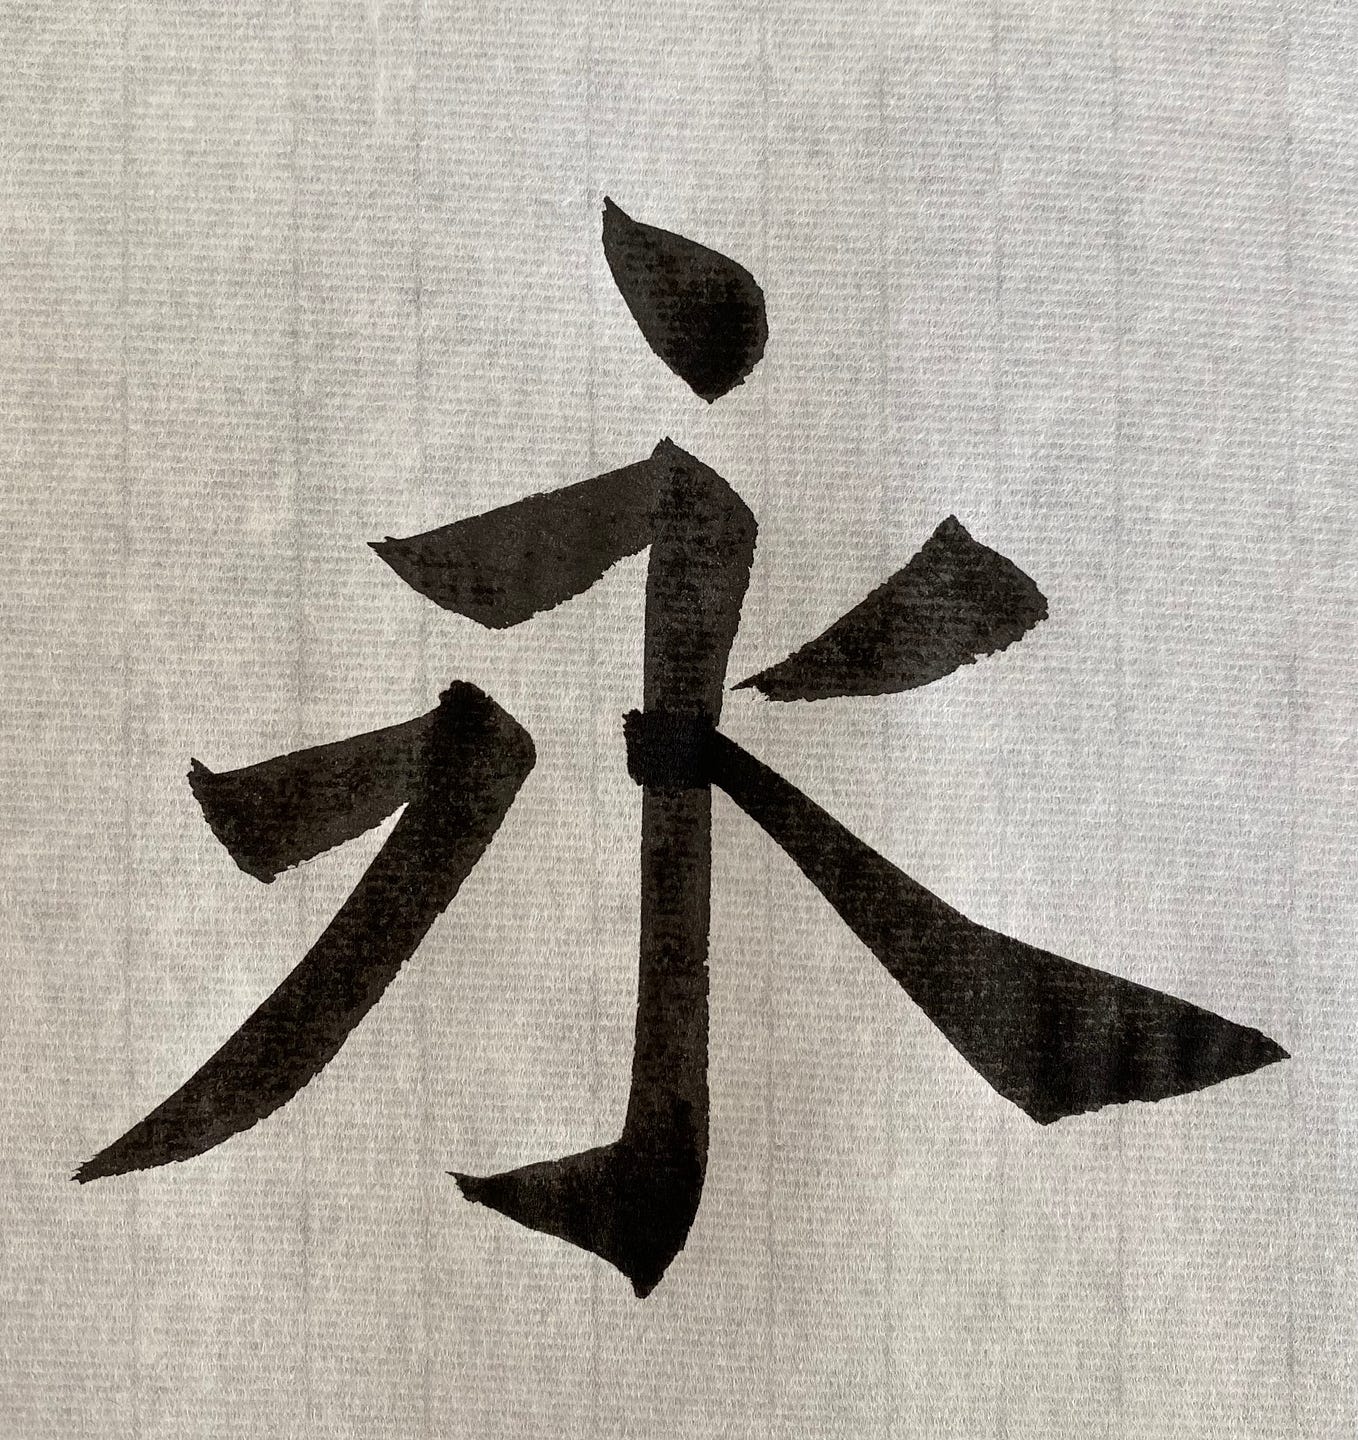 Chinese Calligraphy Video Tutorial